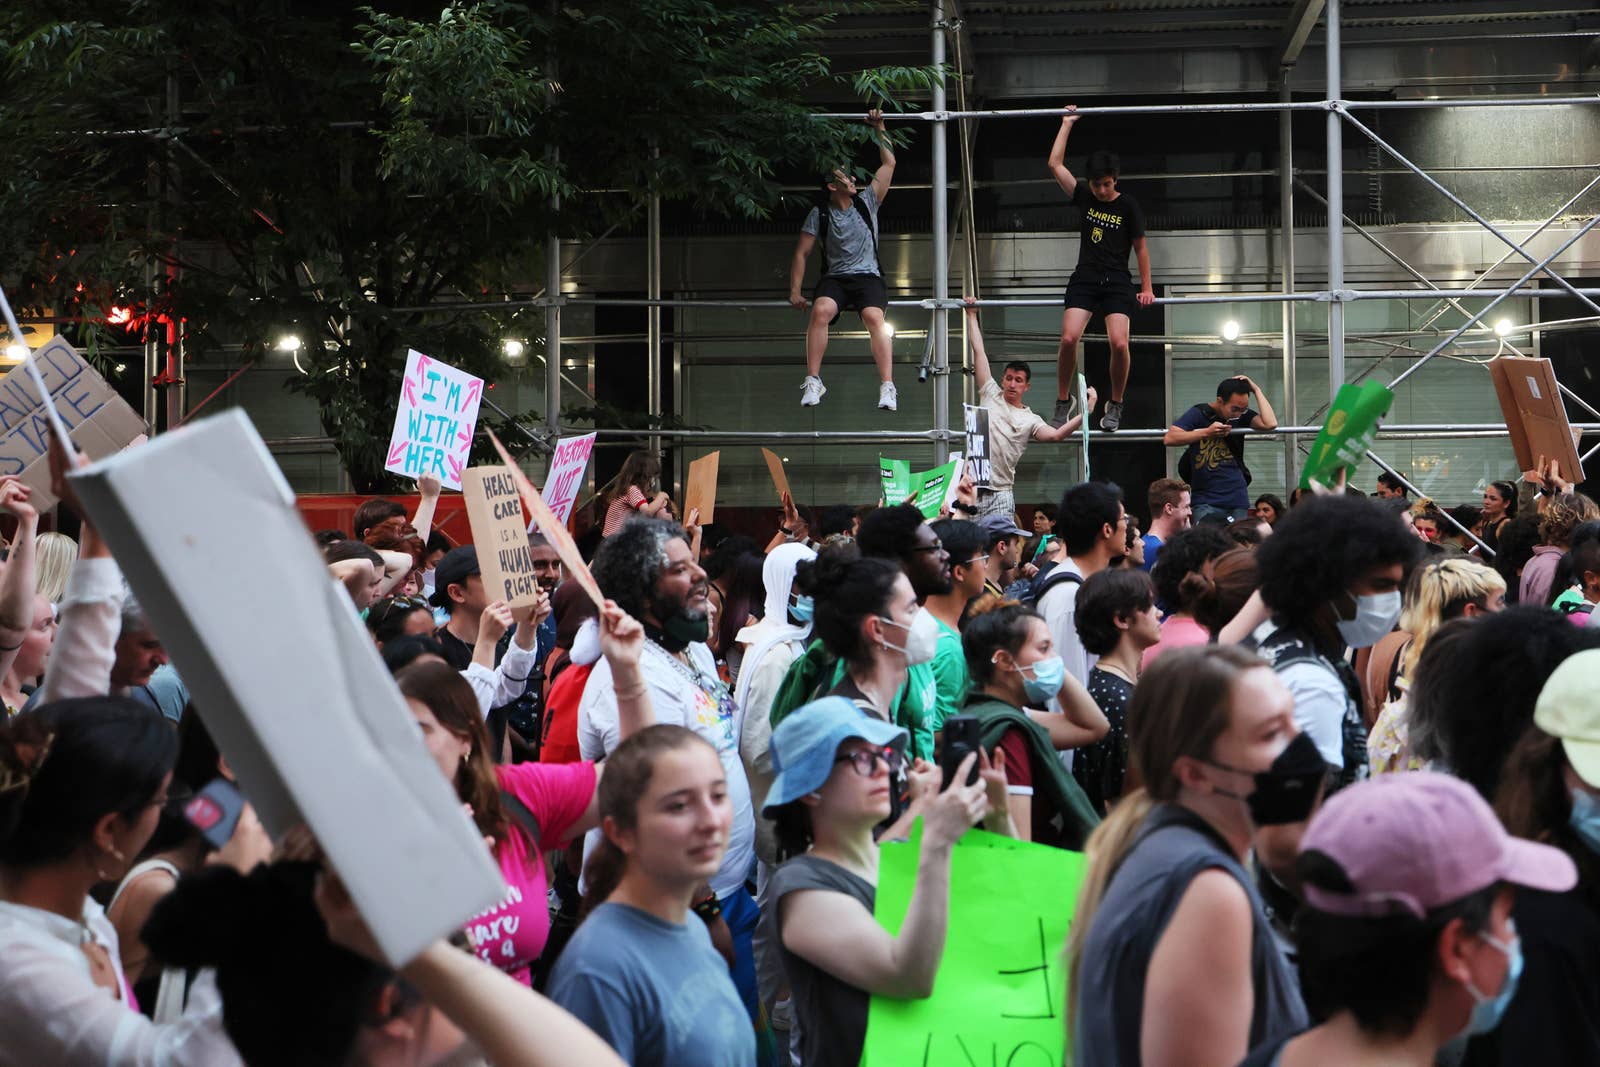 A crowd of people march down the street and hold signs, some also wearing masks